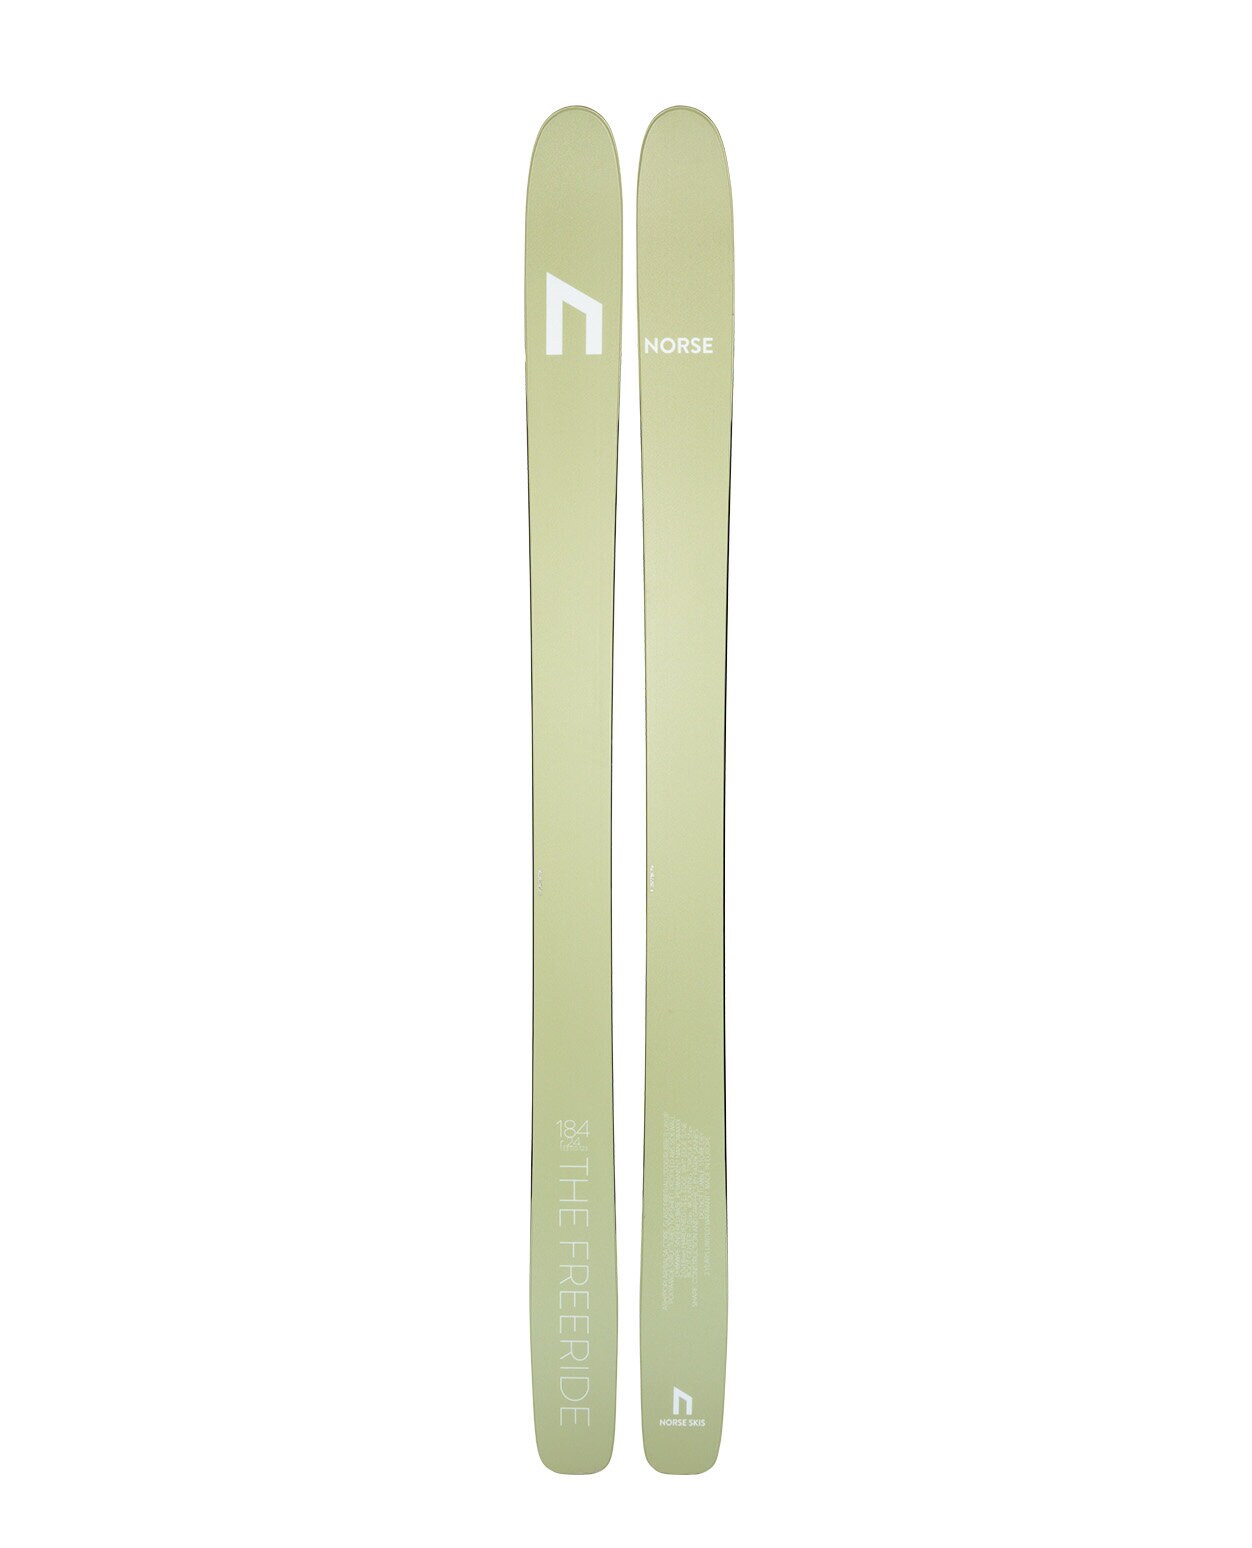 Norse Skis The Freeride 22/23